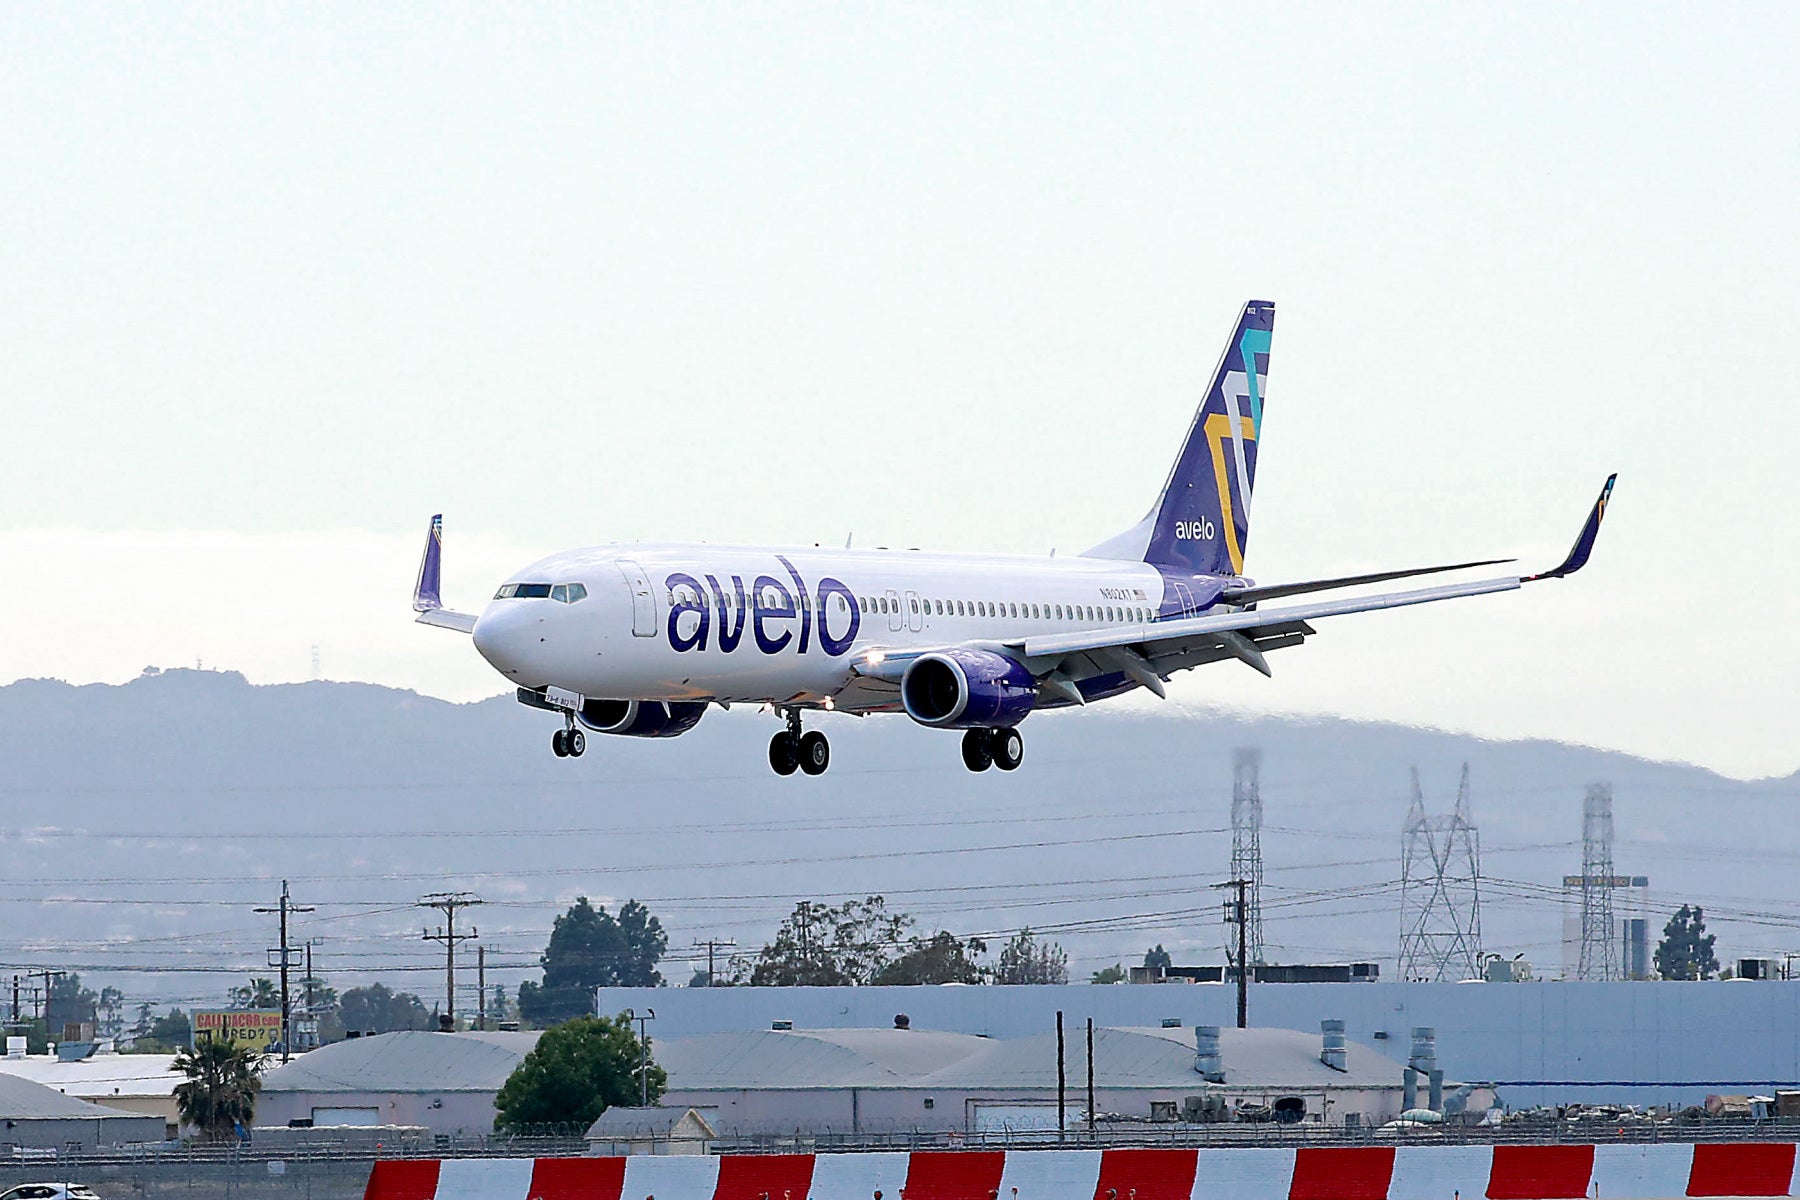 Avelo Boeing 737 coming into land